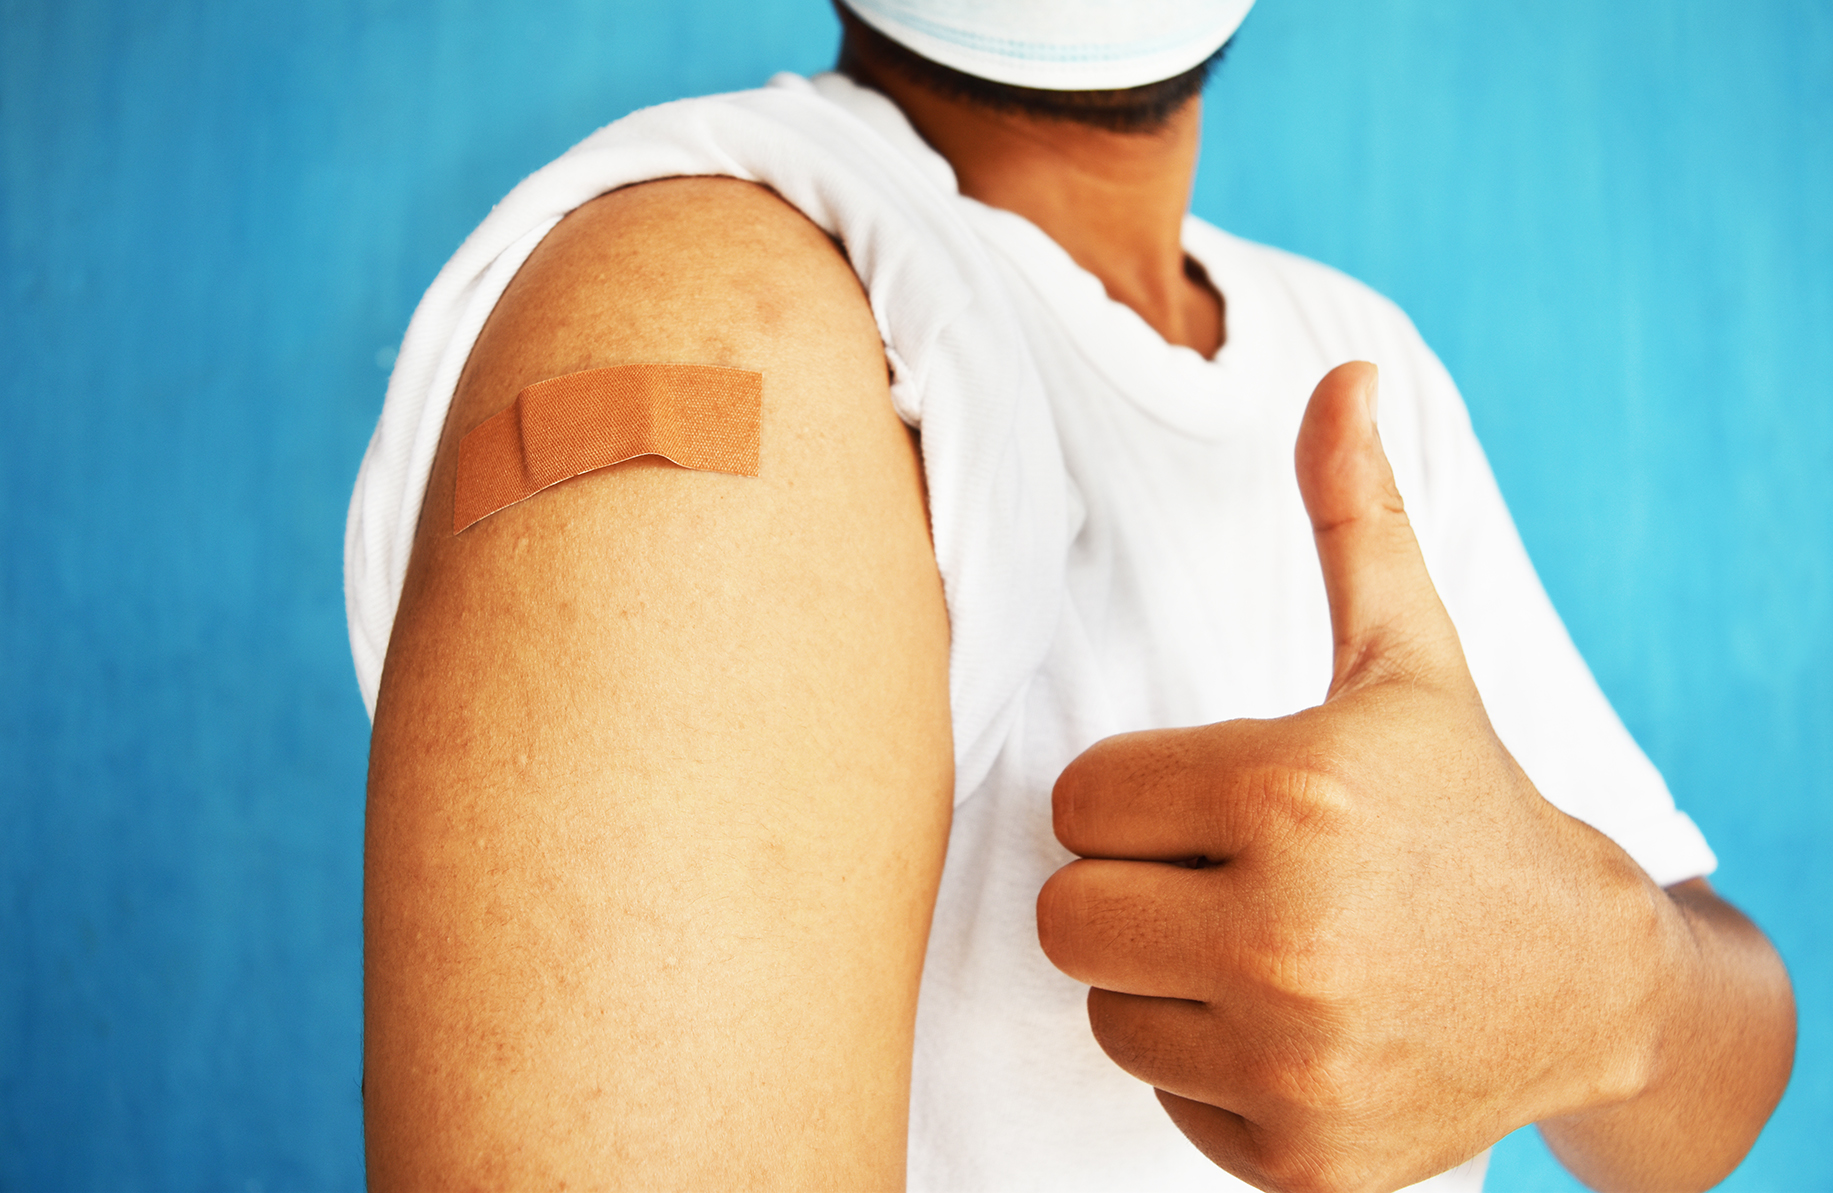 Asian man using adhesive bandage plaster on her arm showing thumb up gesture after injection vaccine.